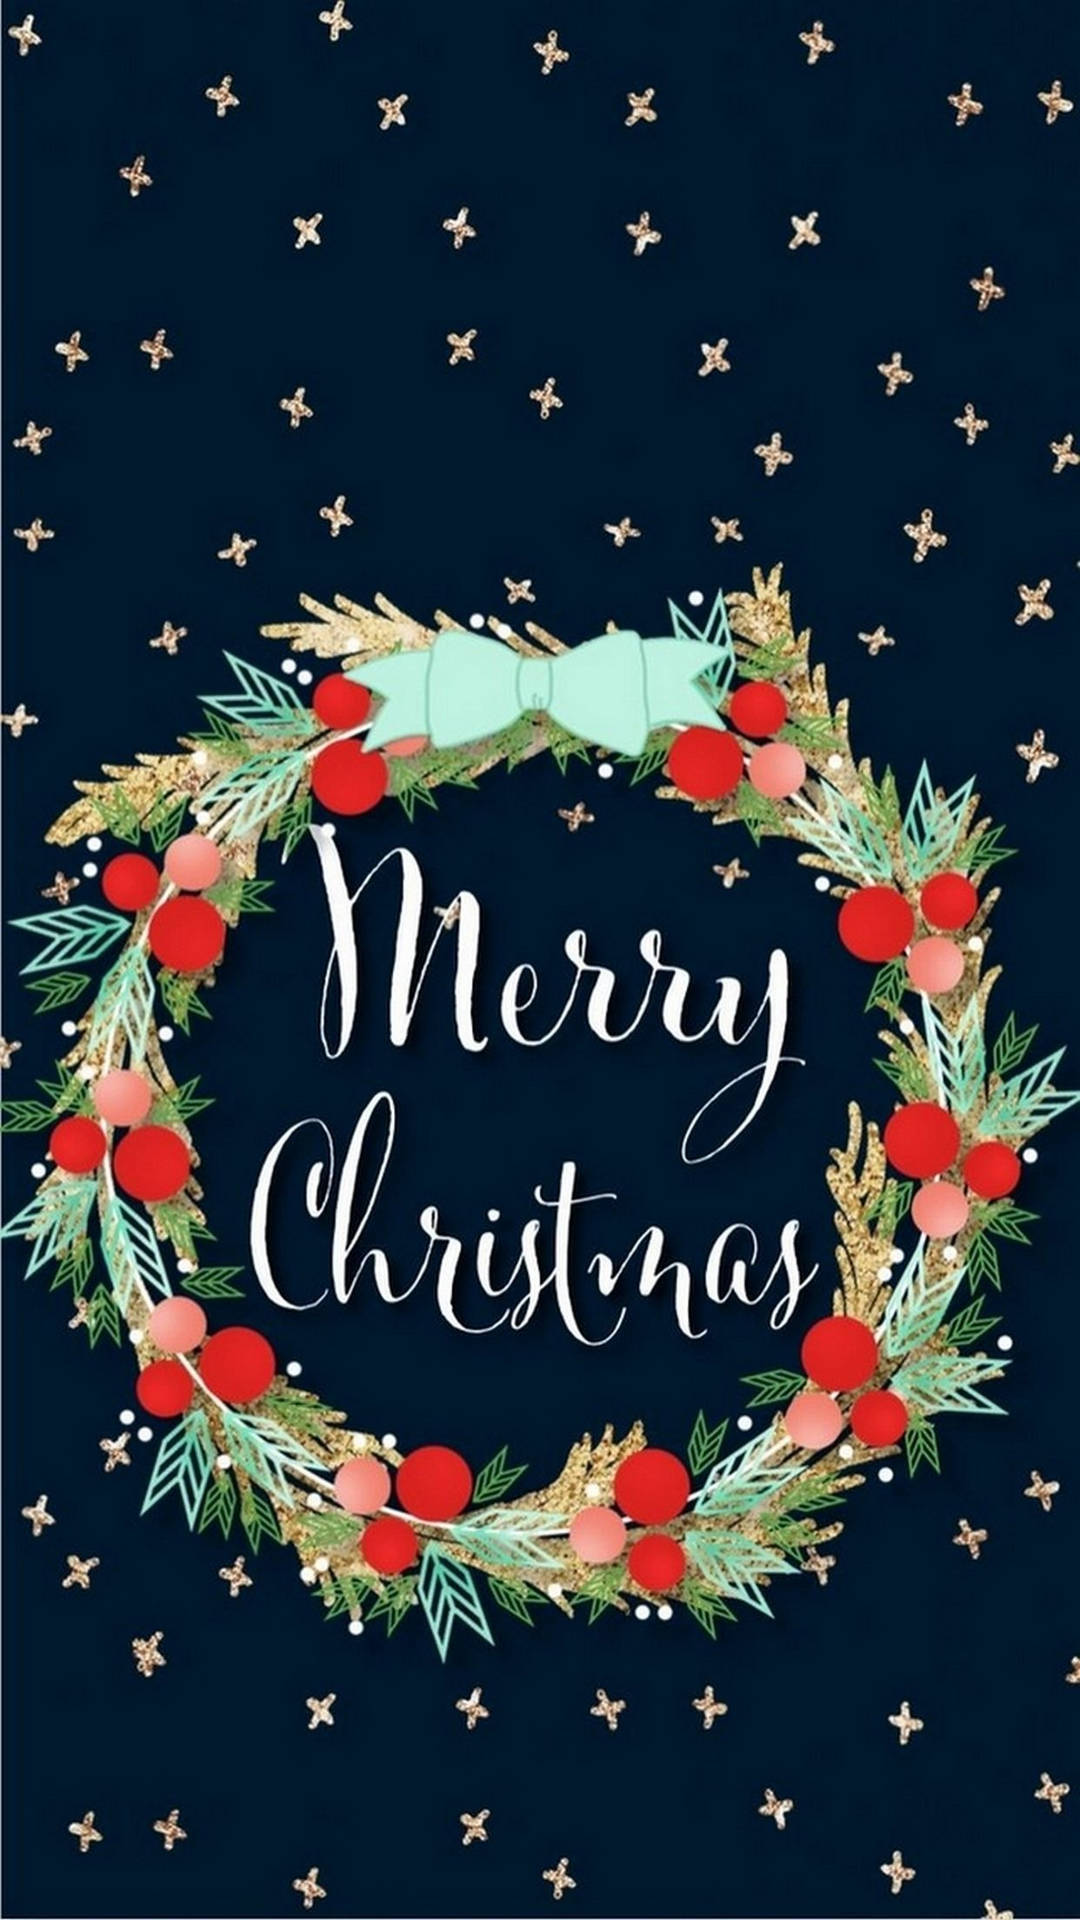 Merry Christmas Greetings Iphone Background